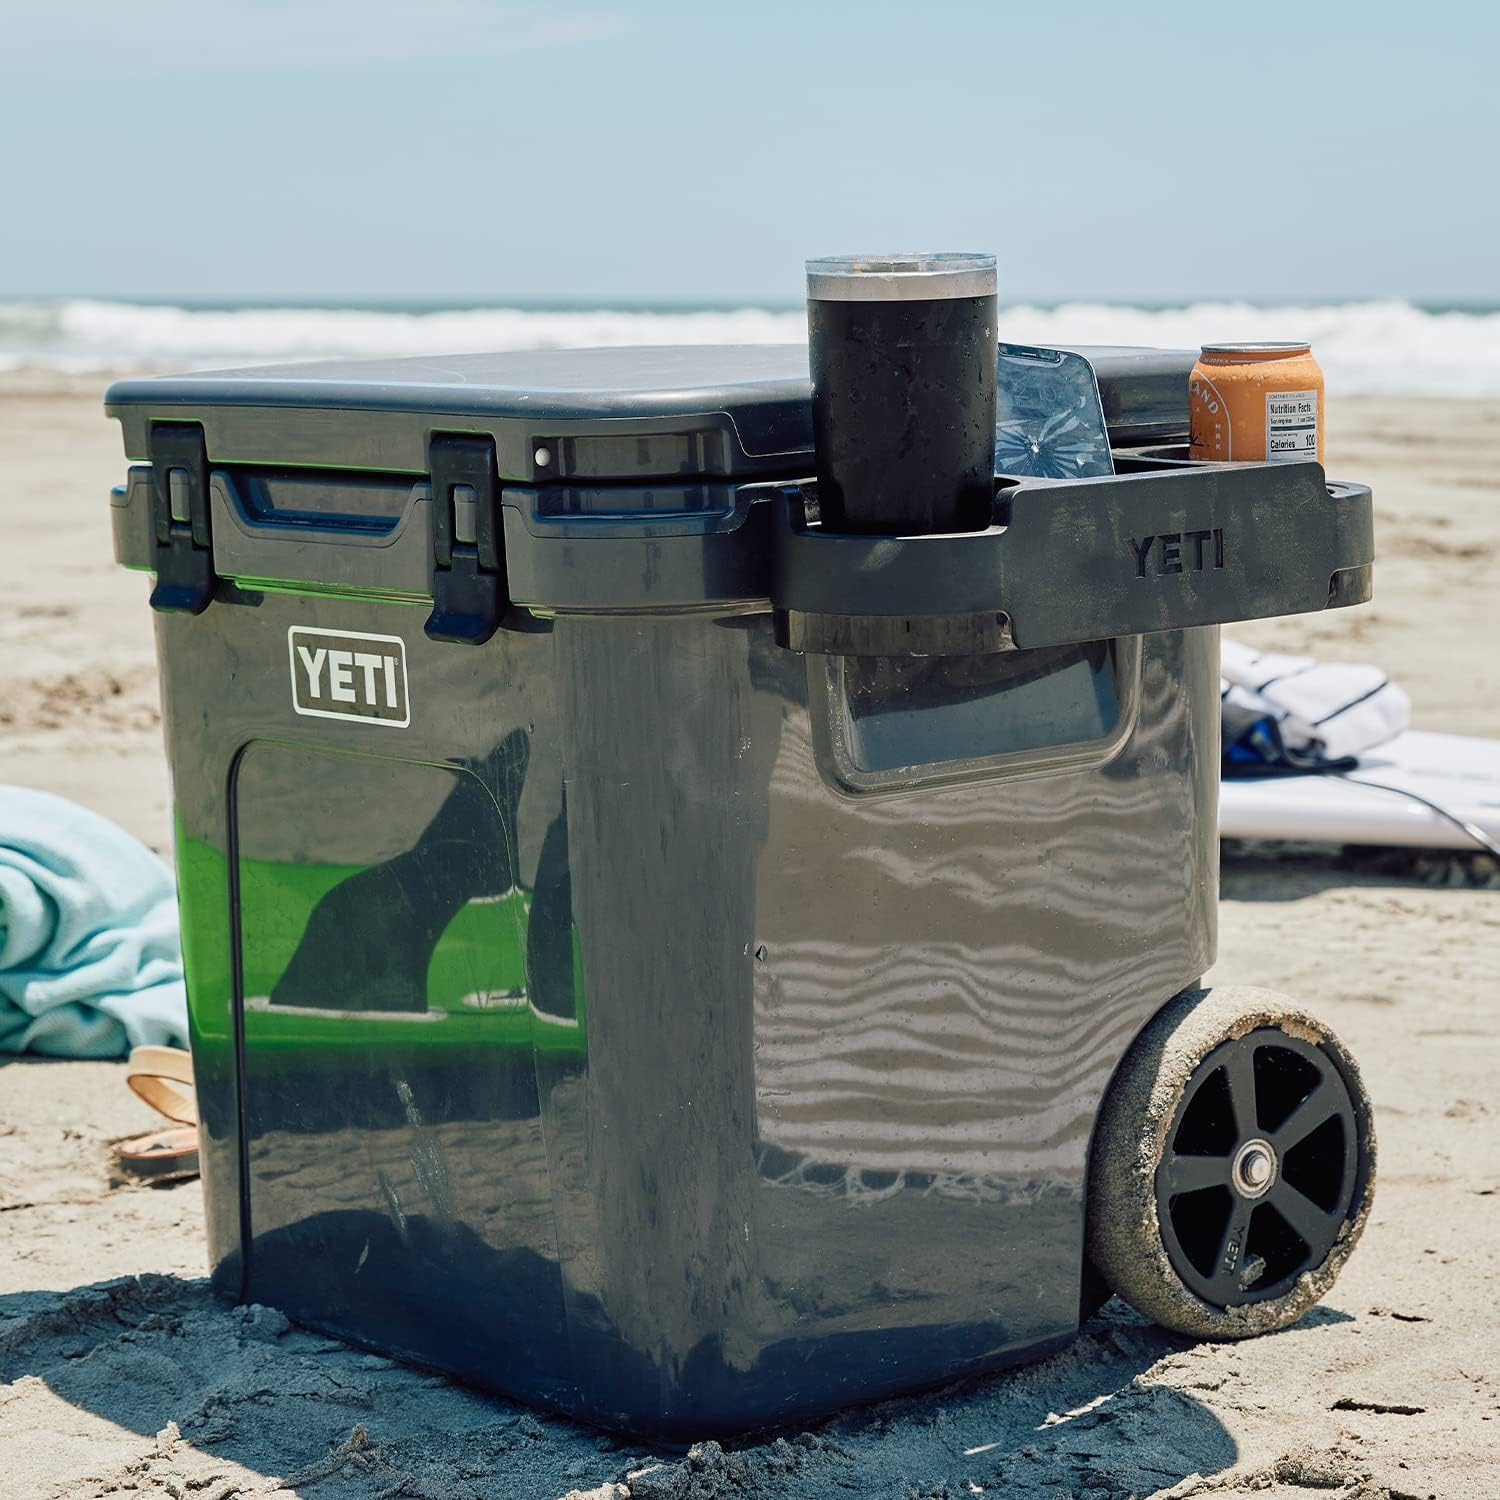 With proper care and maintenance your YETI cooler will stay looking new for years.